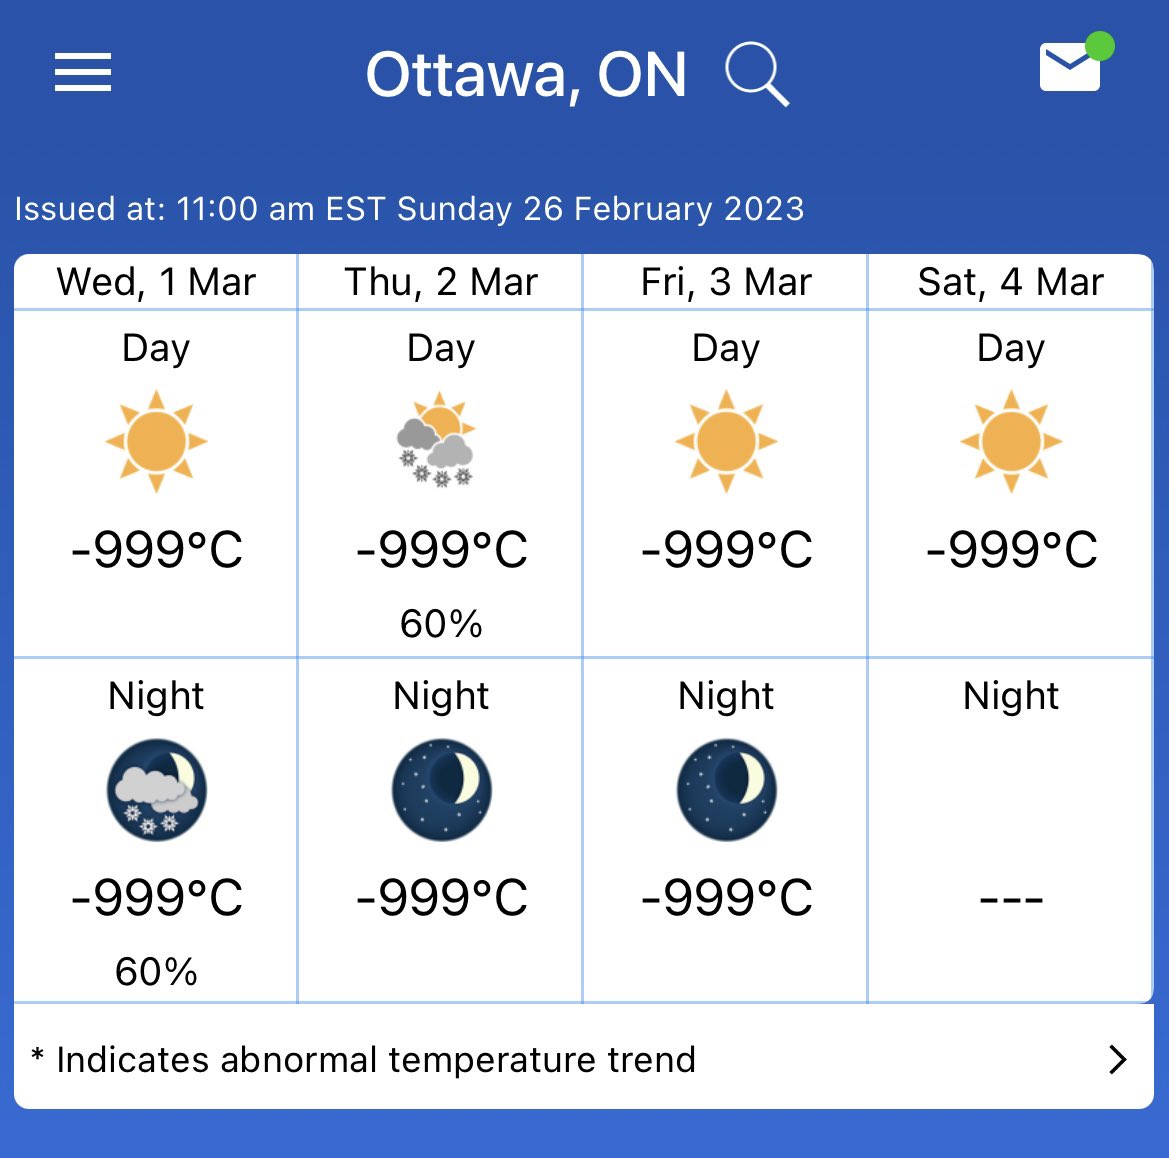 @NCC_Skateway Is the forecast sufficiently chilly to reconsider opening the canal? #ottnews